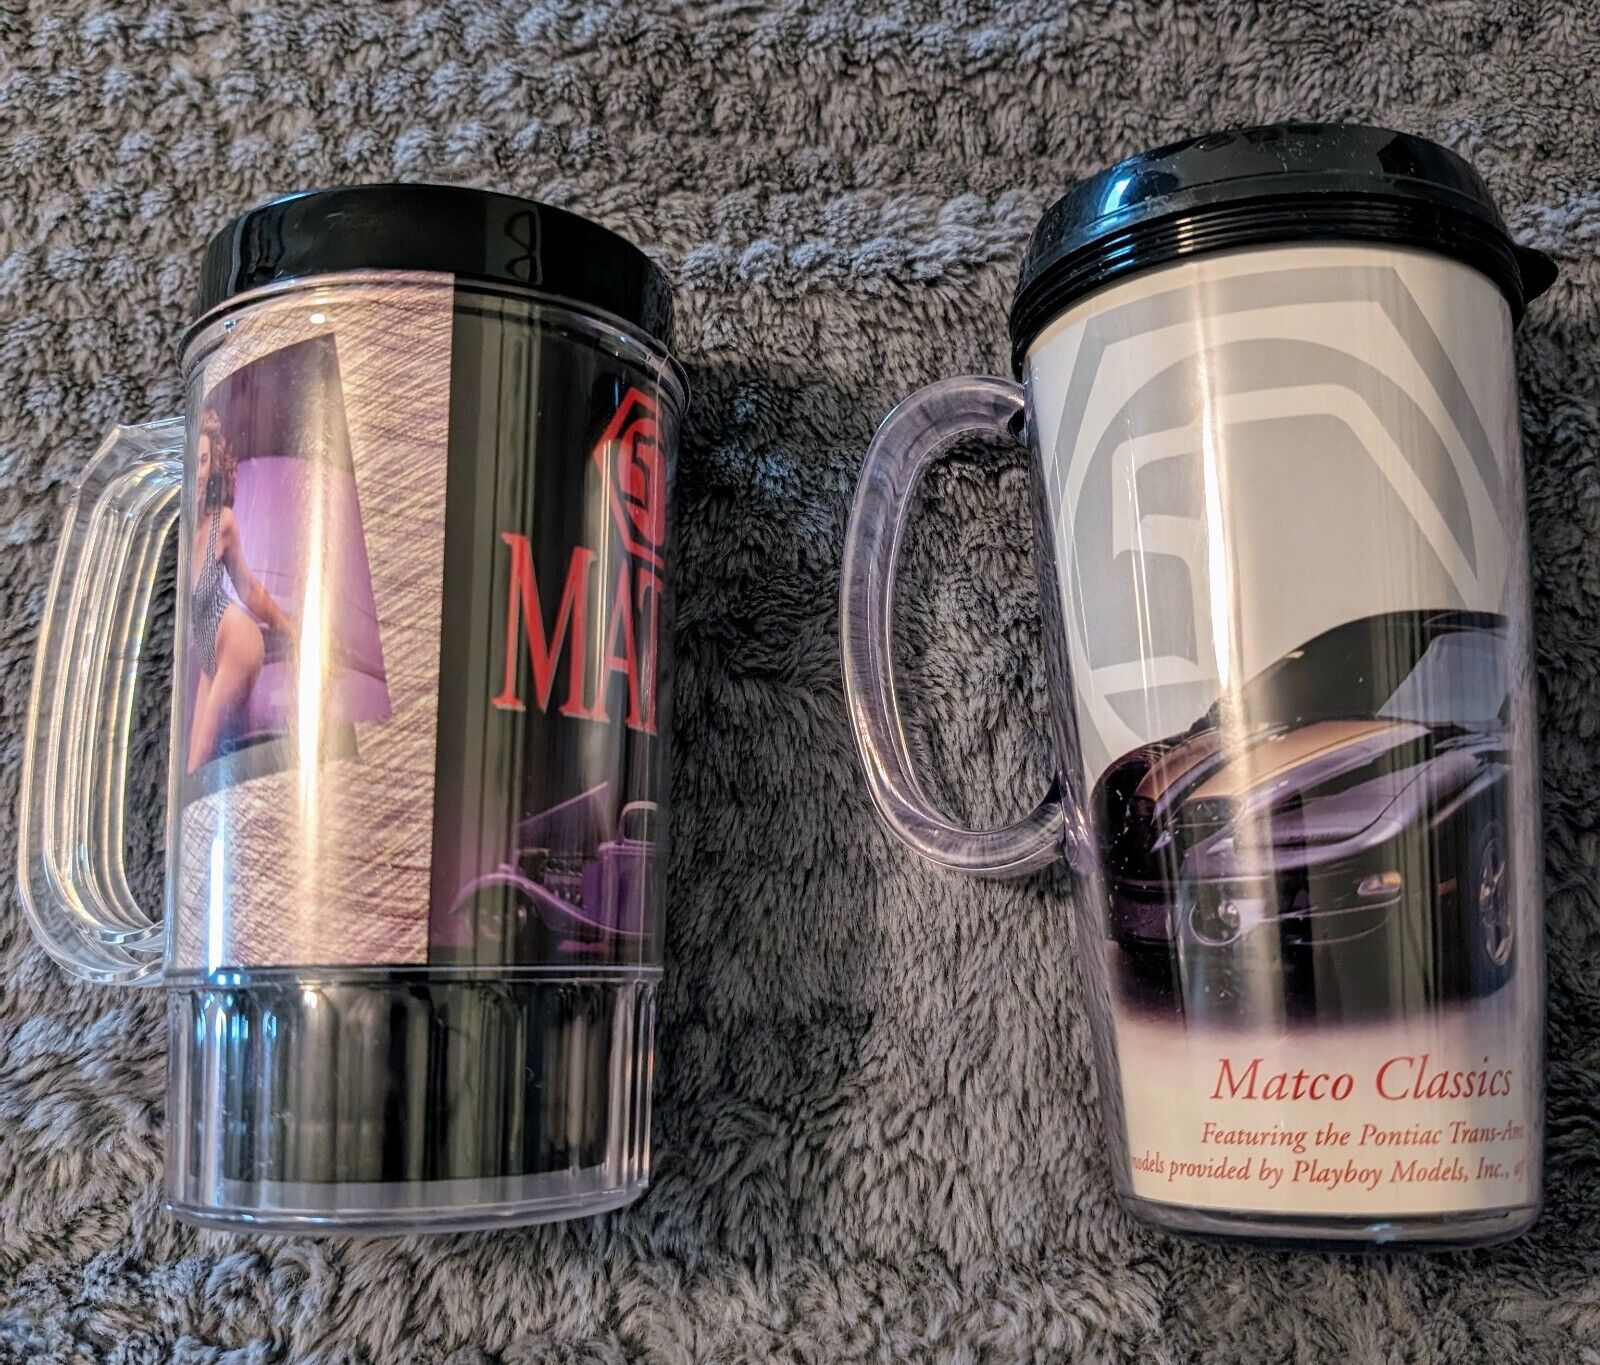 Vintage Matco Tools Classics Trans Am Playboy Models Pin-up 80s Insulated Mugs